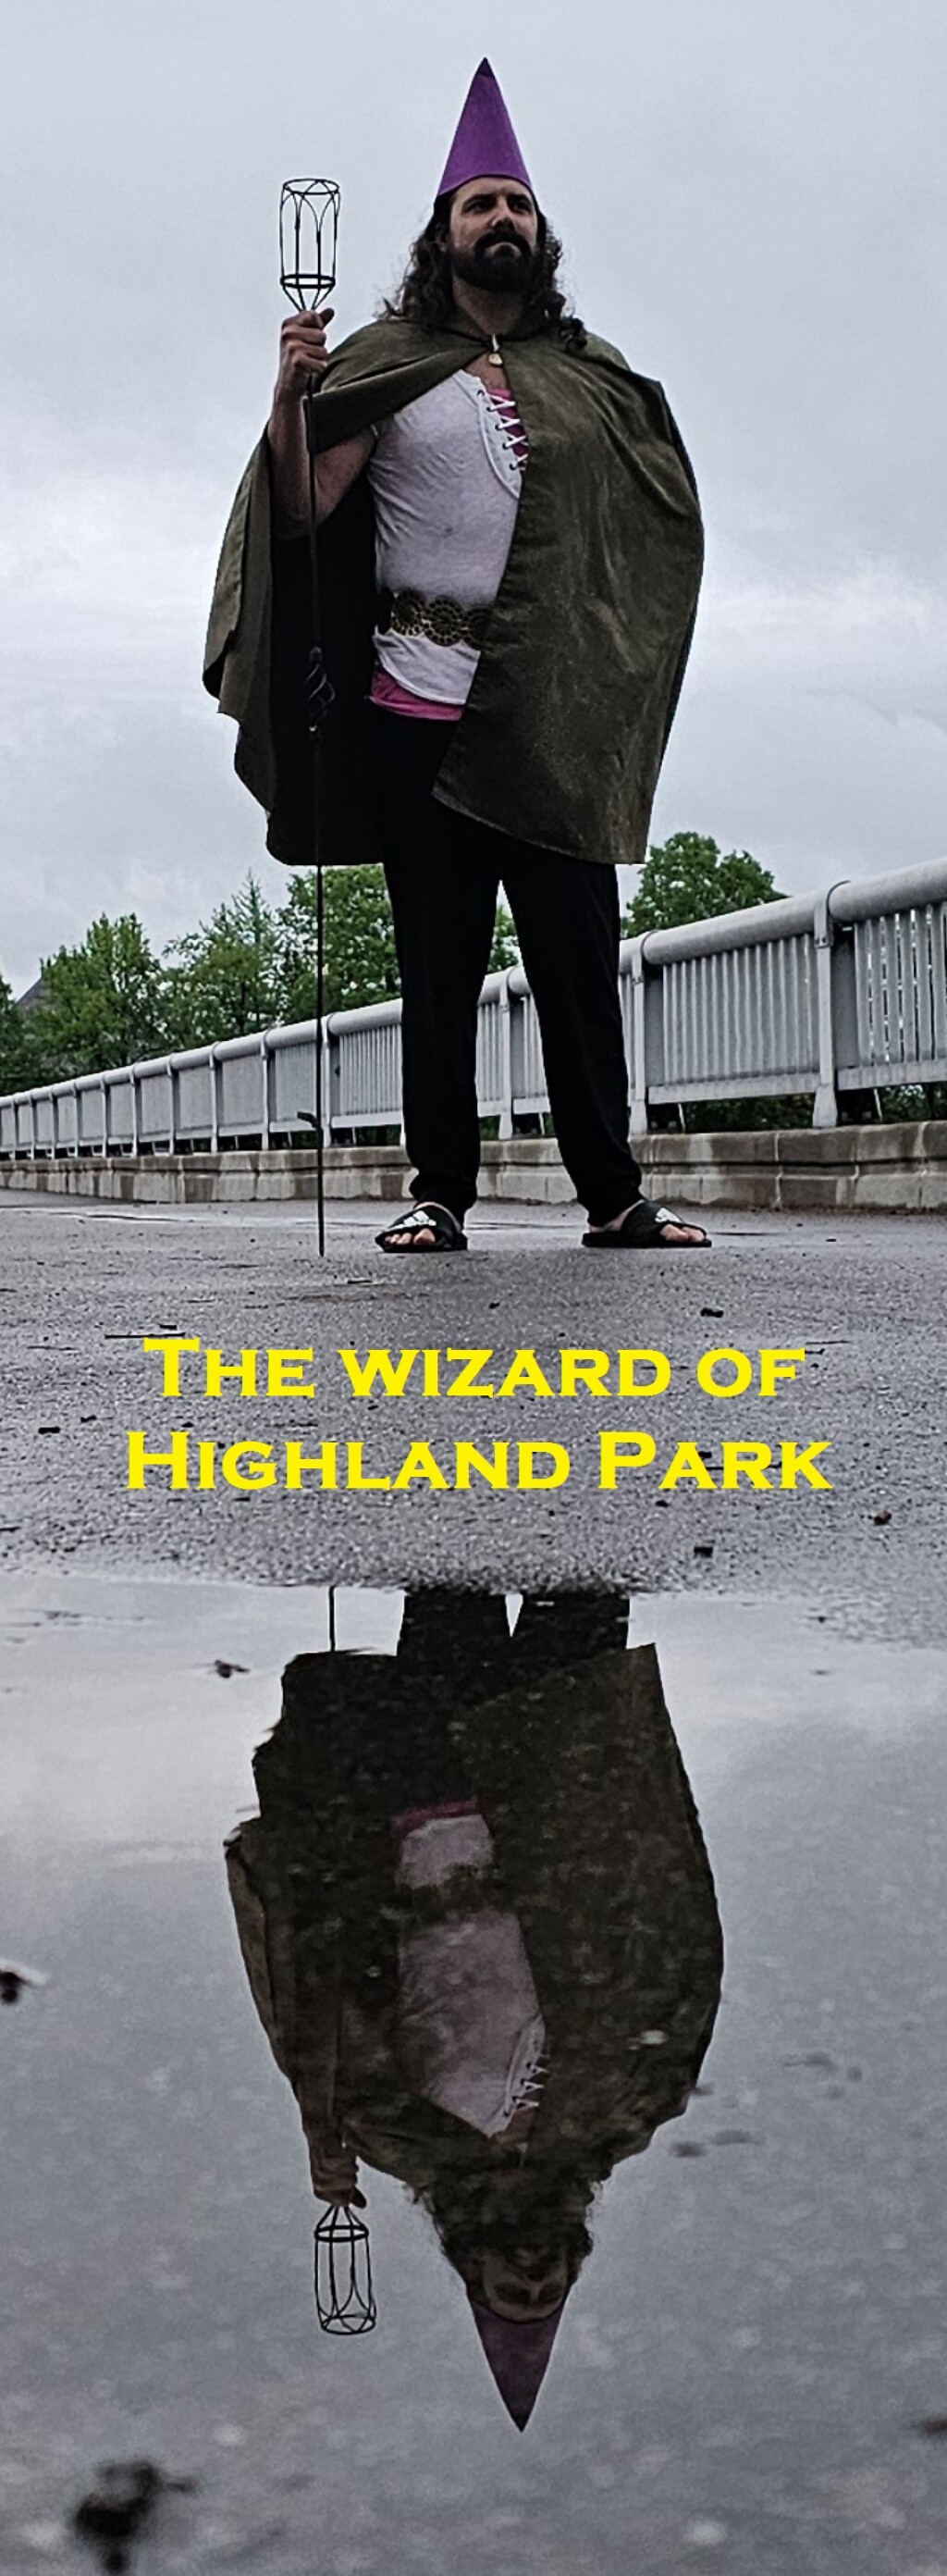 Filmposter for The Wizard of Highland Park